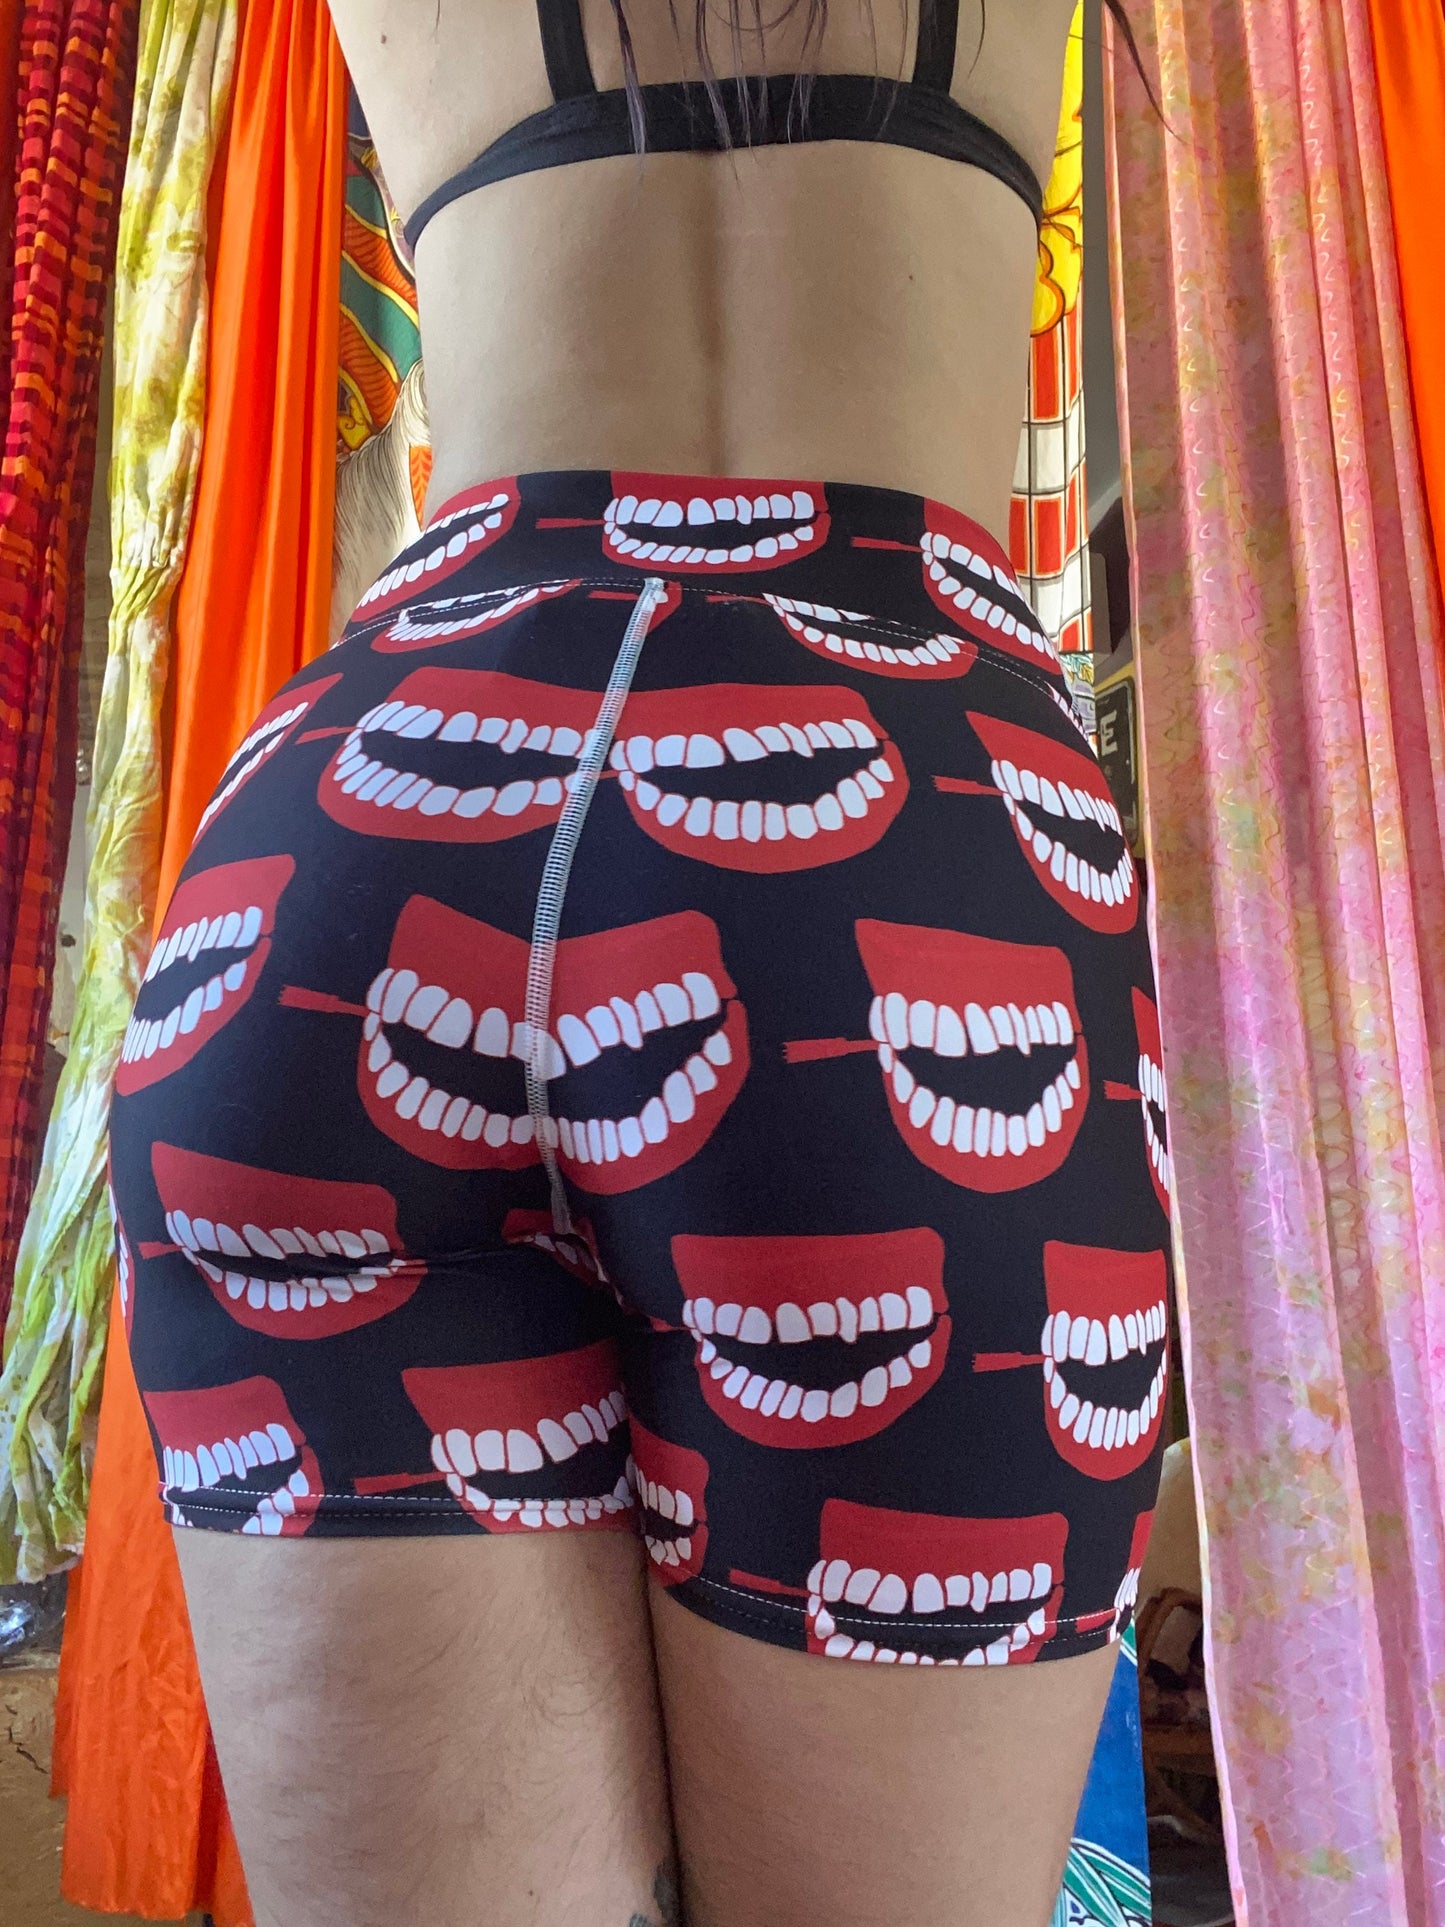 Chompers Yoga Shorts~ available in sizes XS-XL